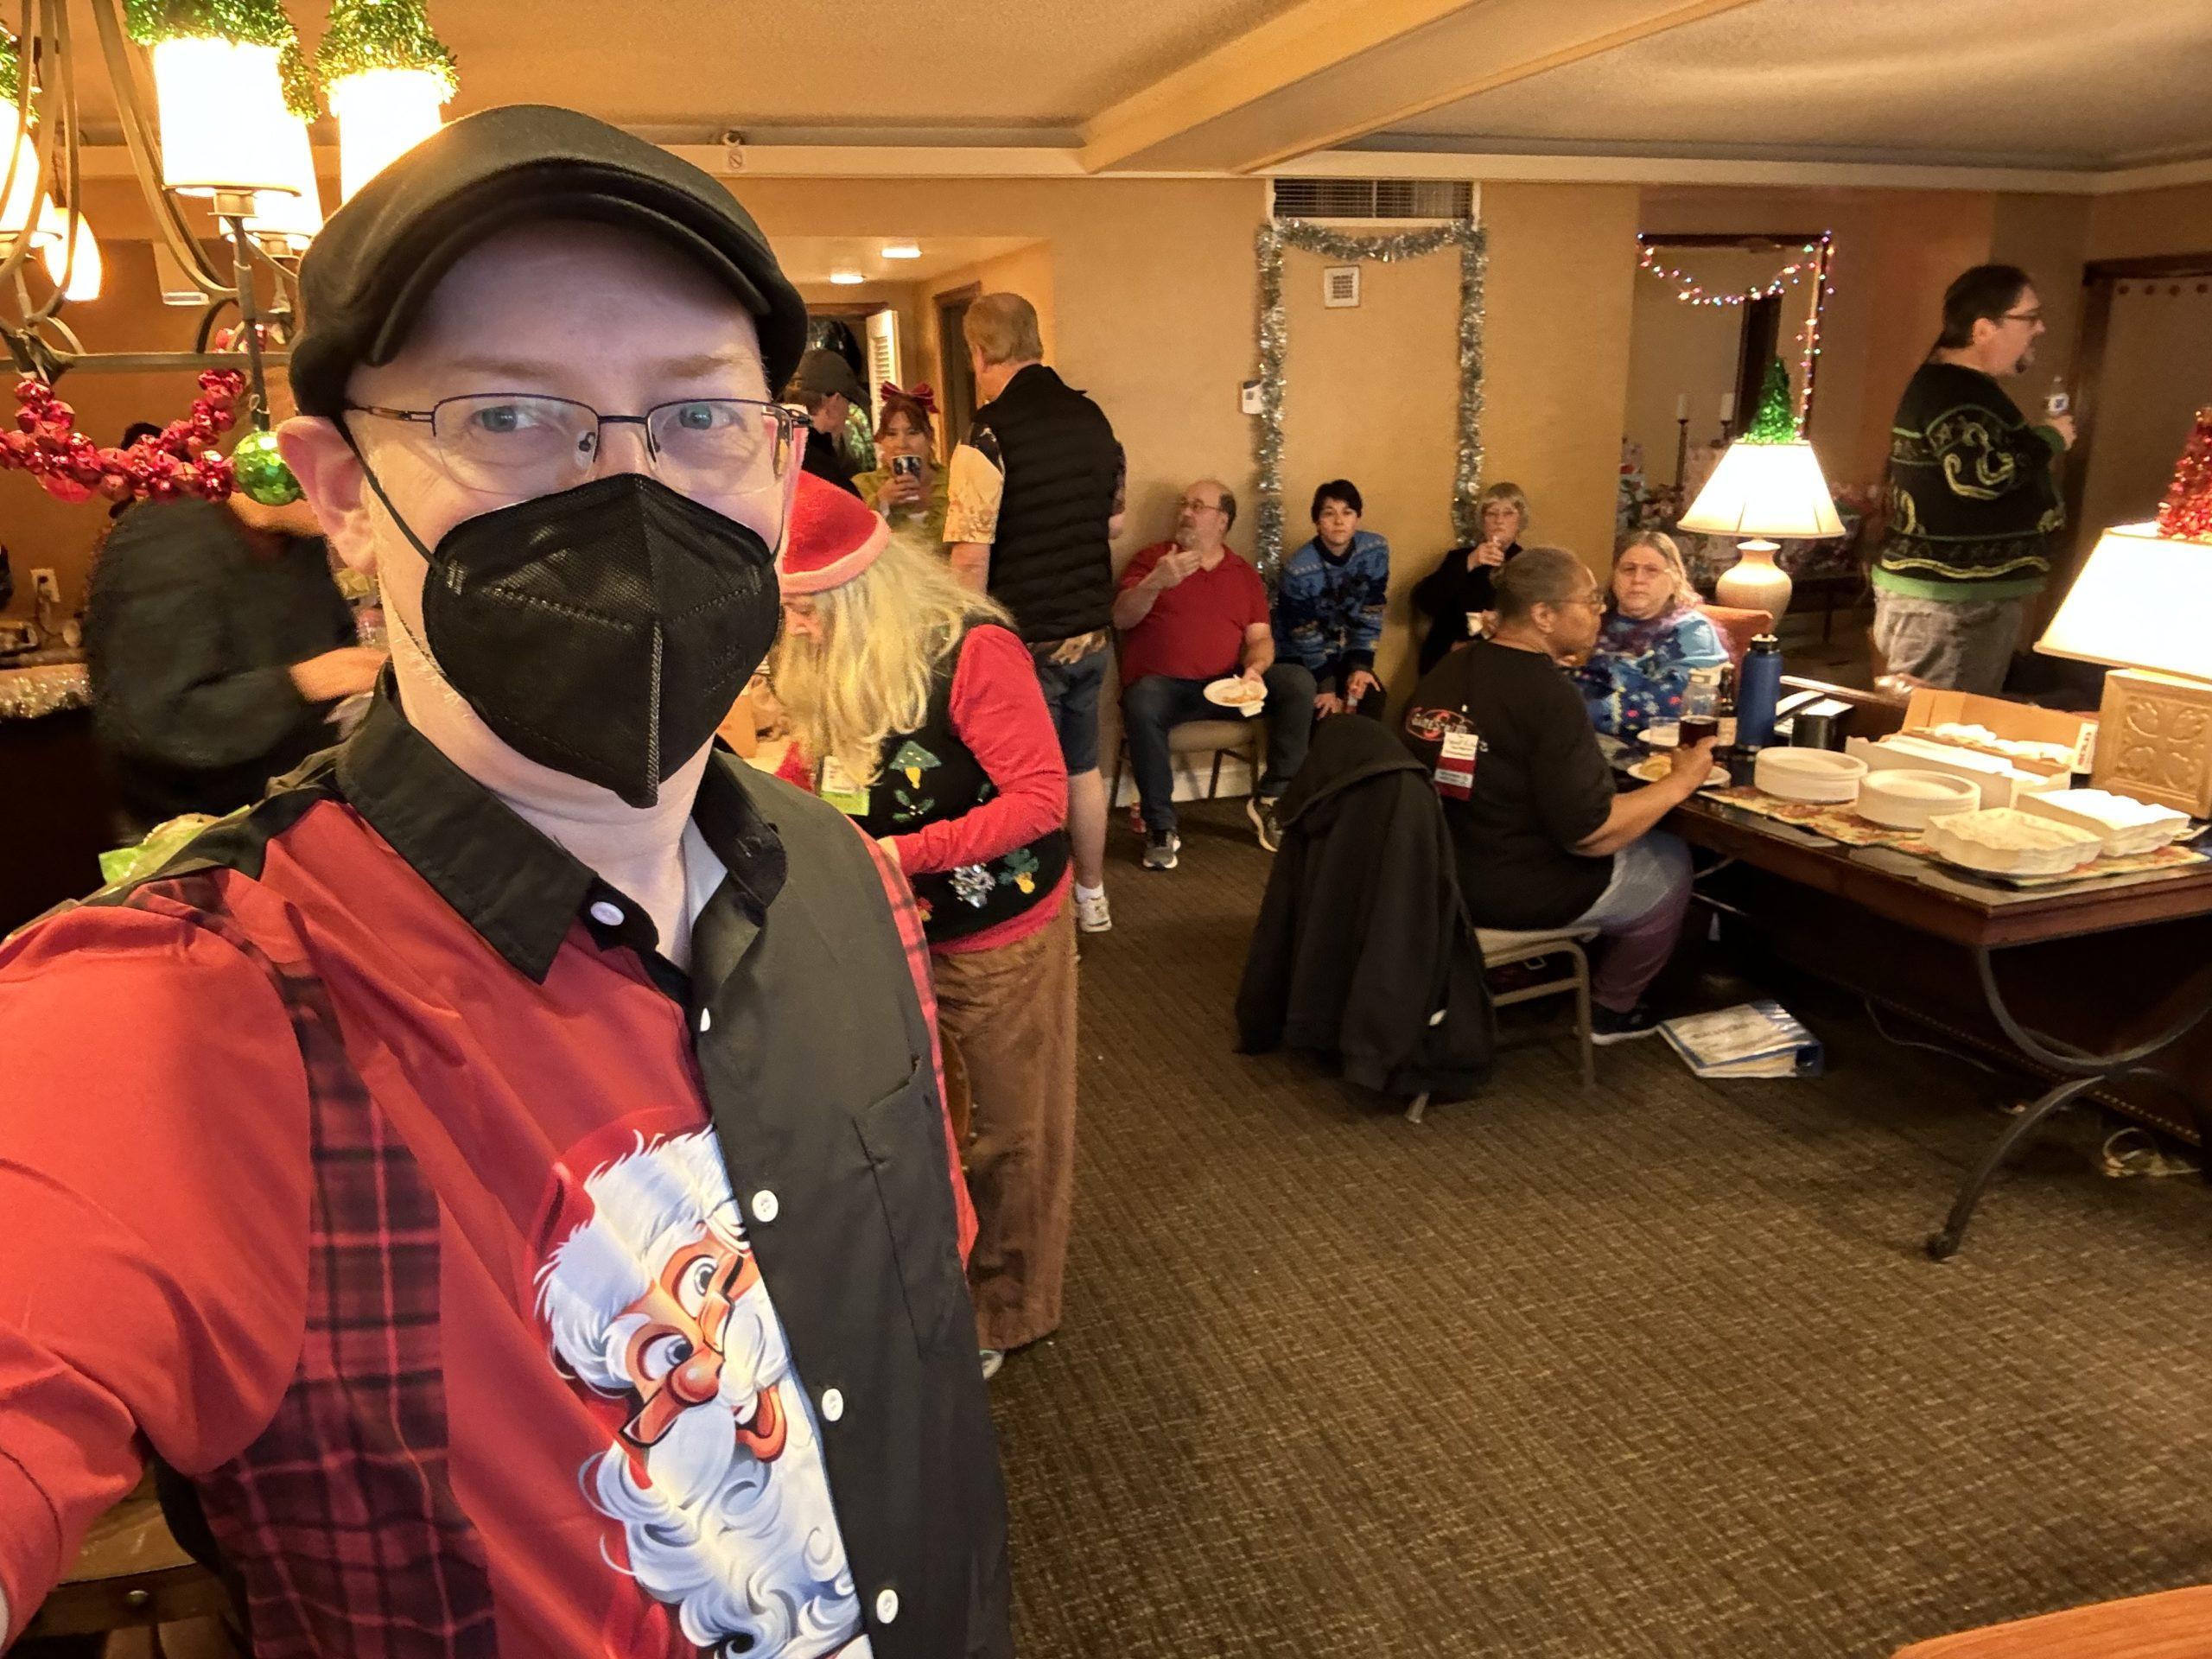 Me, wearing a mask and a button-up shirt that’s black on one side and has Santa peeking out from behind the buttons on the other, in a hotel room with holiday decorations and people behind me eating and chatting.